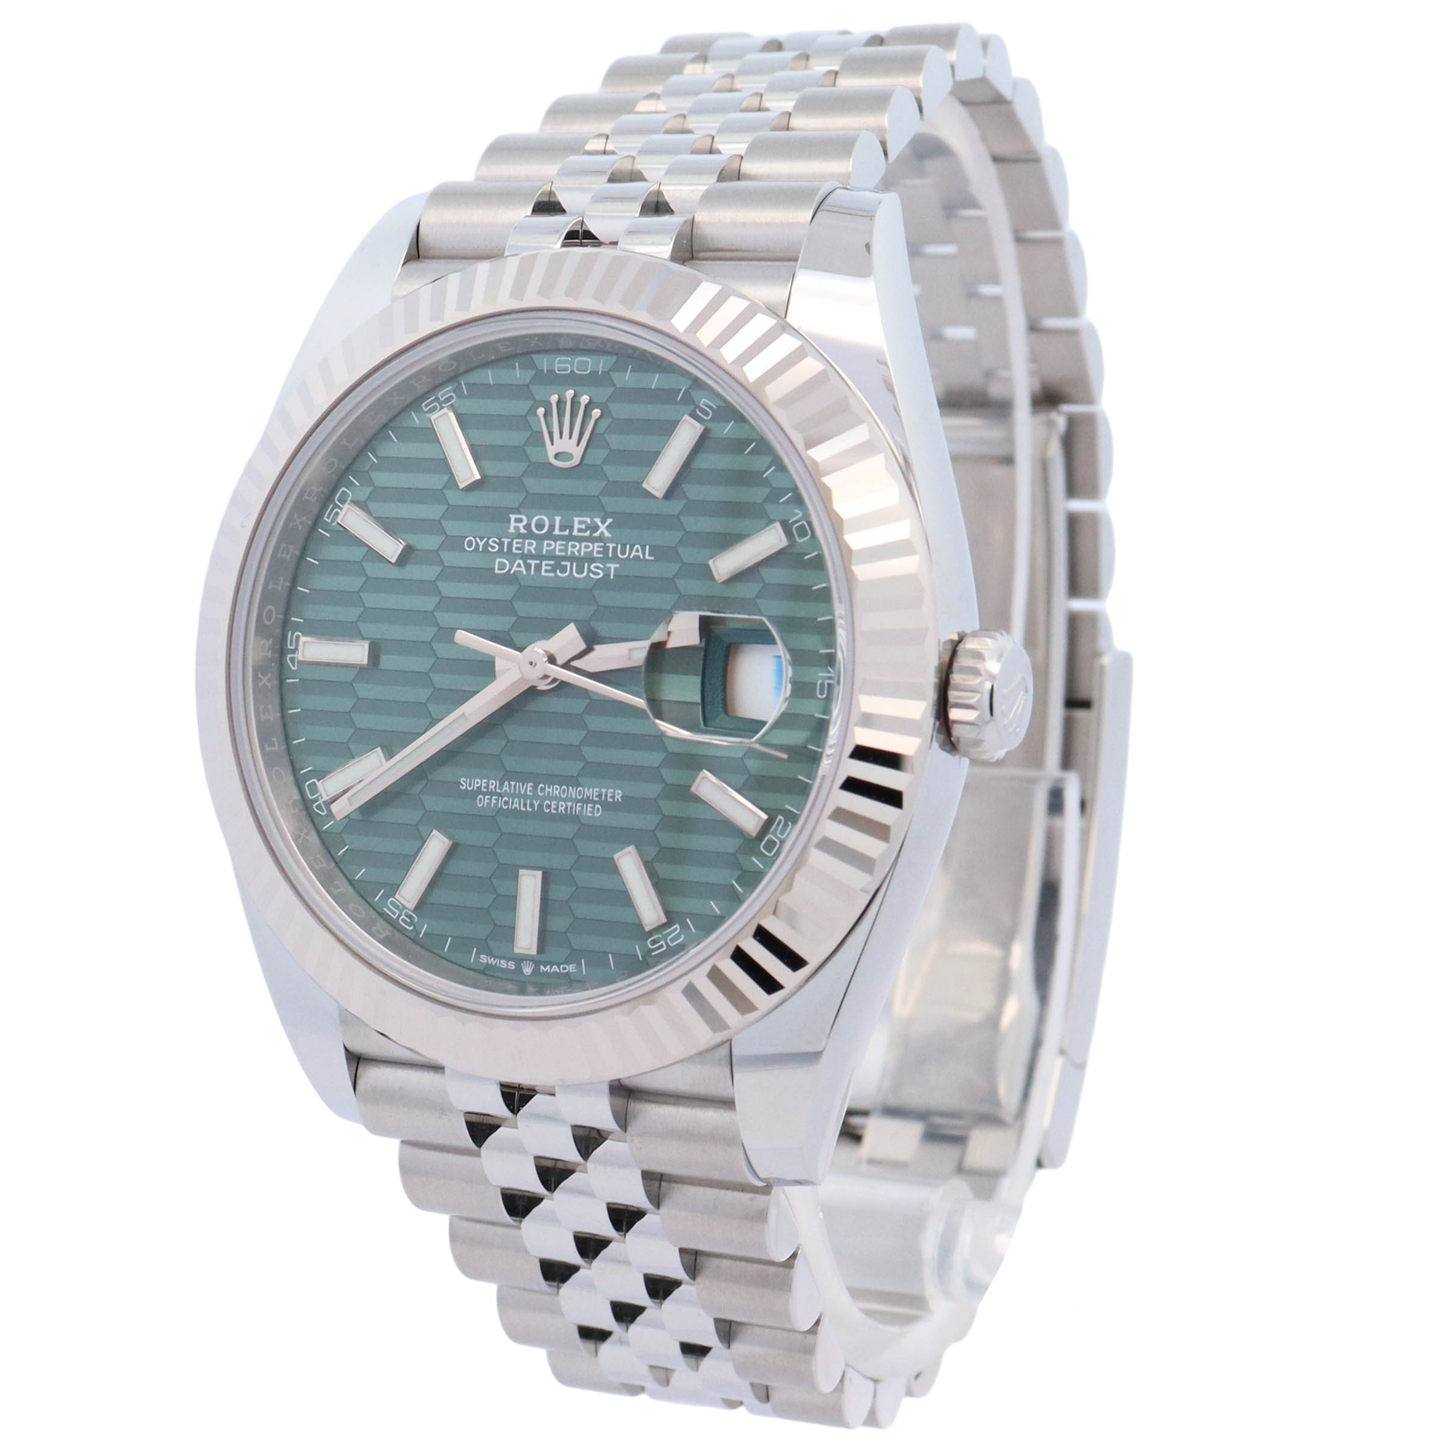 Rolex Datejust 41 Stainless Steel Mint Green Fluted Motiff Dial Watch Reference# 126334 - Happy Jewelers Fine Jewelry Lifetime Warranty